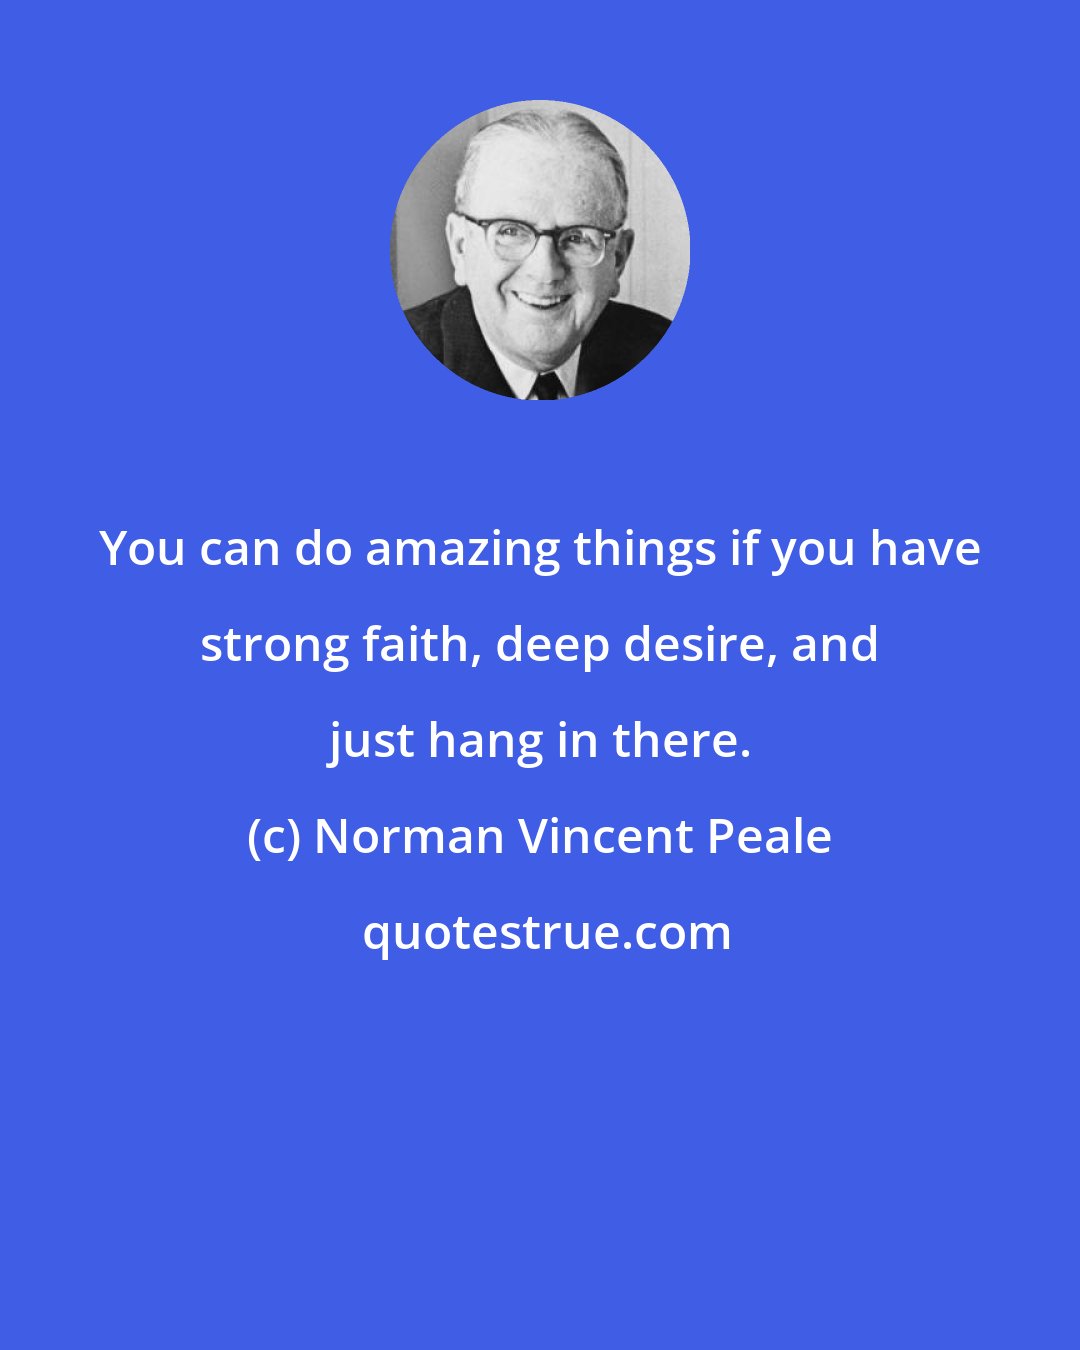 Norman Vincent Peale: You can do amazing things if you have strong faith, deep desire, and just hang in there.